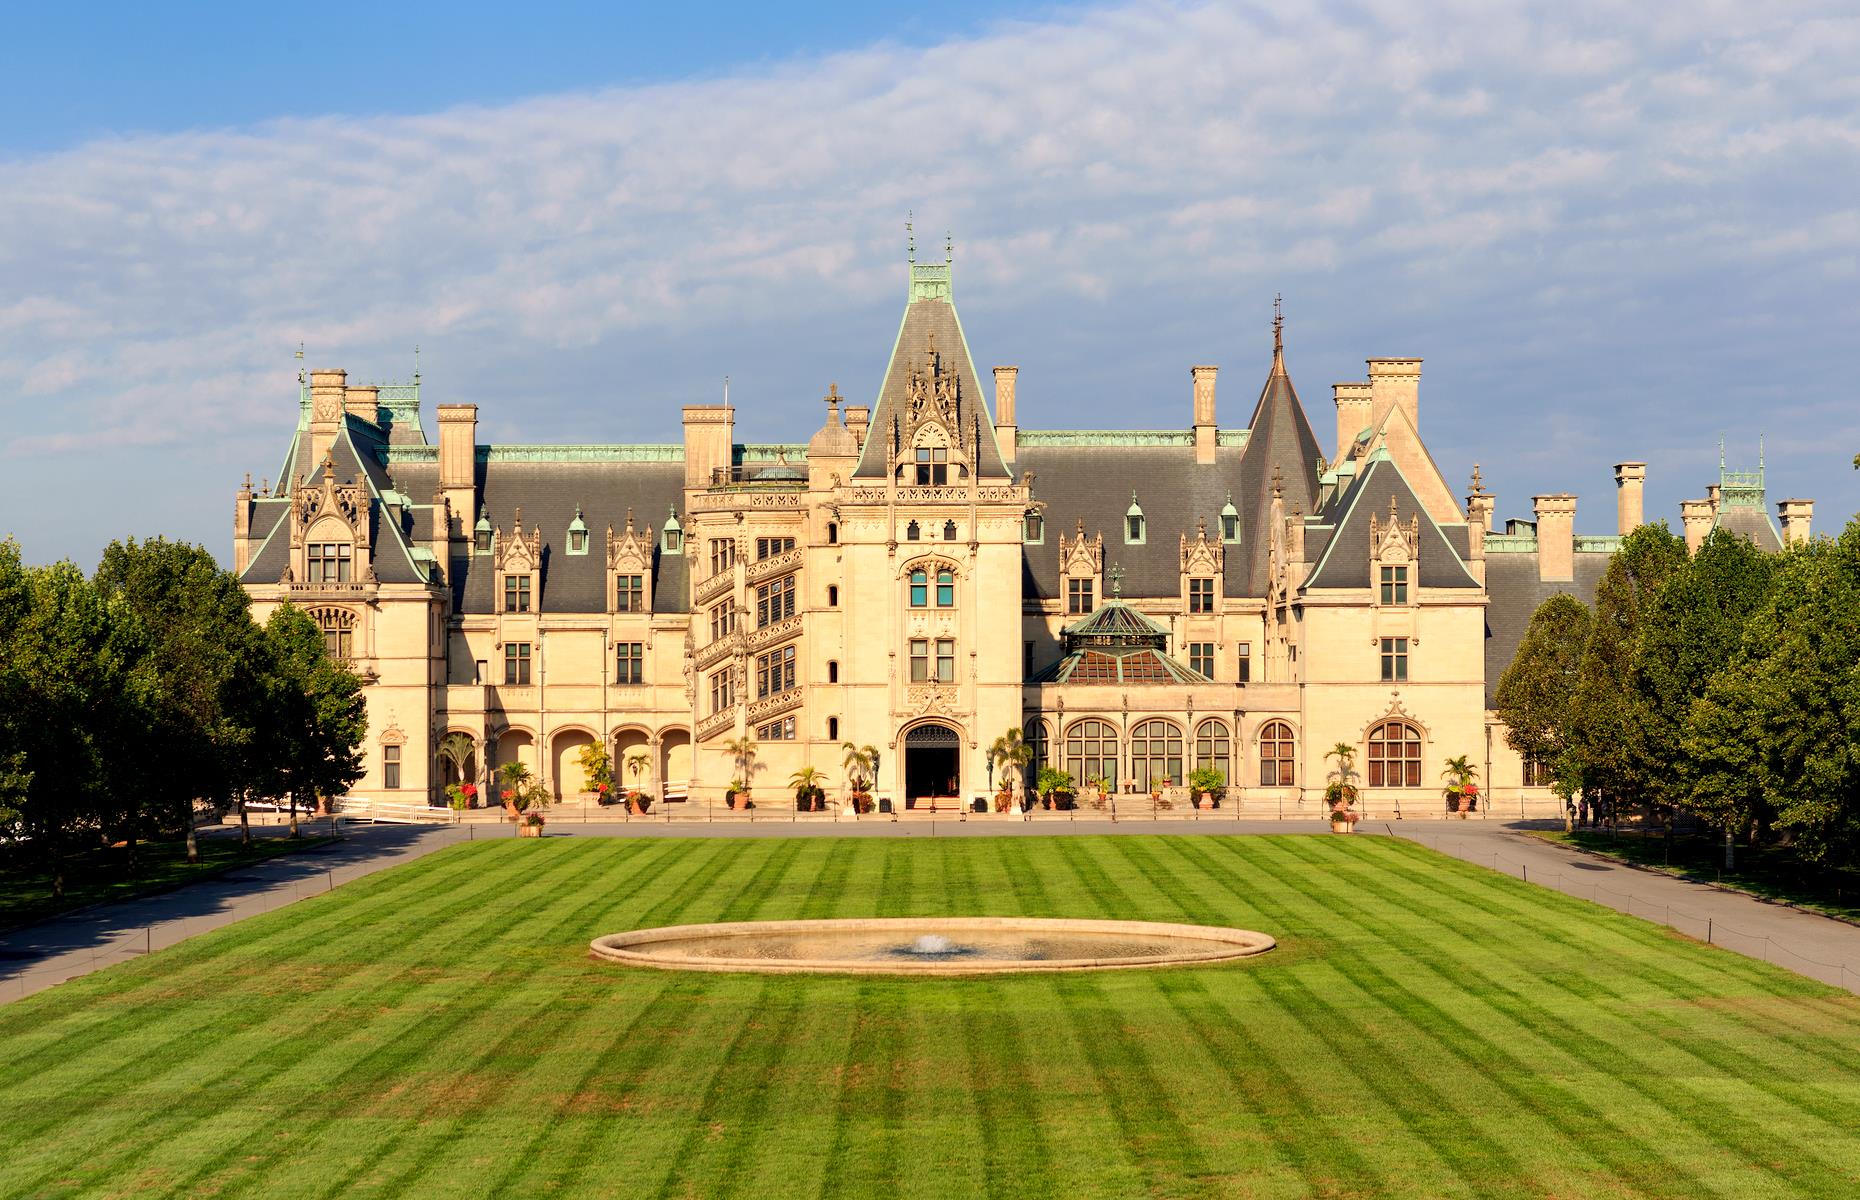 <p><a href="https://www.biltmore.com/stay/">This impressive estate</a> is billed as America's largest home, having been built for George Vanderbilt over a six-year period from 1889 to 1895. Now, the French Renaissance-style château draws in visitors with its 250 rooms, including the stately banquet hall and the tome-filled library. You'll also find formal gardens, a winery and several spots for an overnight stay.</p>  <p><a href="https://www.loveexploring.com/gallerylist/98728/beautiful-historic-homes-in-america-you-can-actually-visit"><strong>Beautiful historic homes in America you can actually visit</strong></a></p>